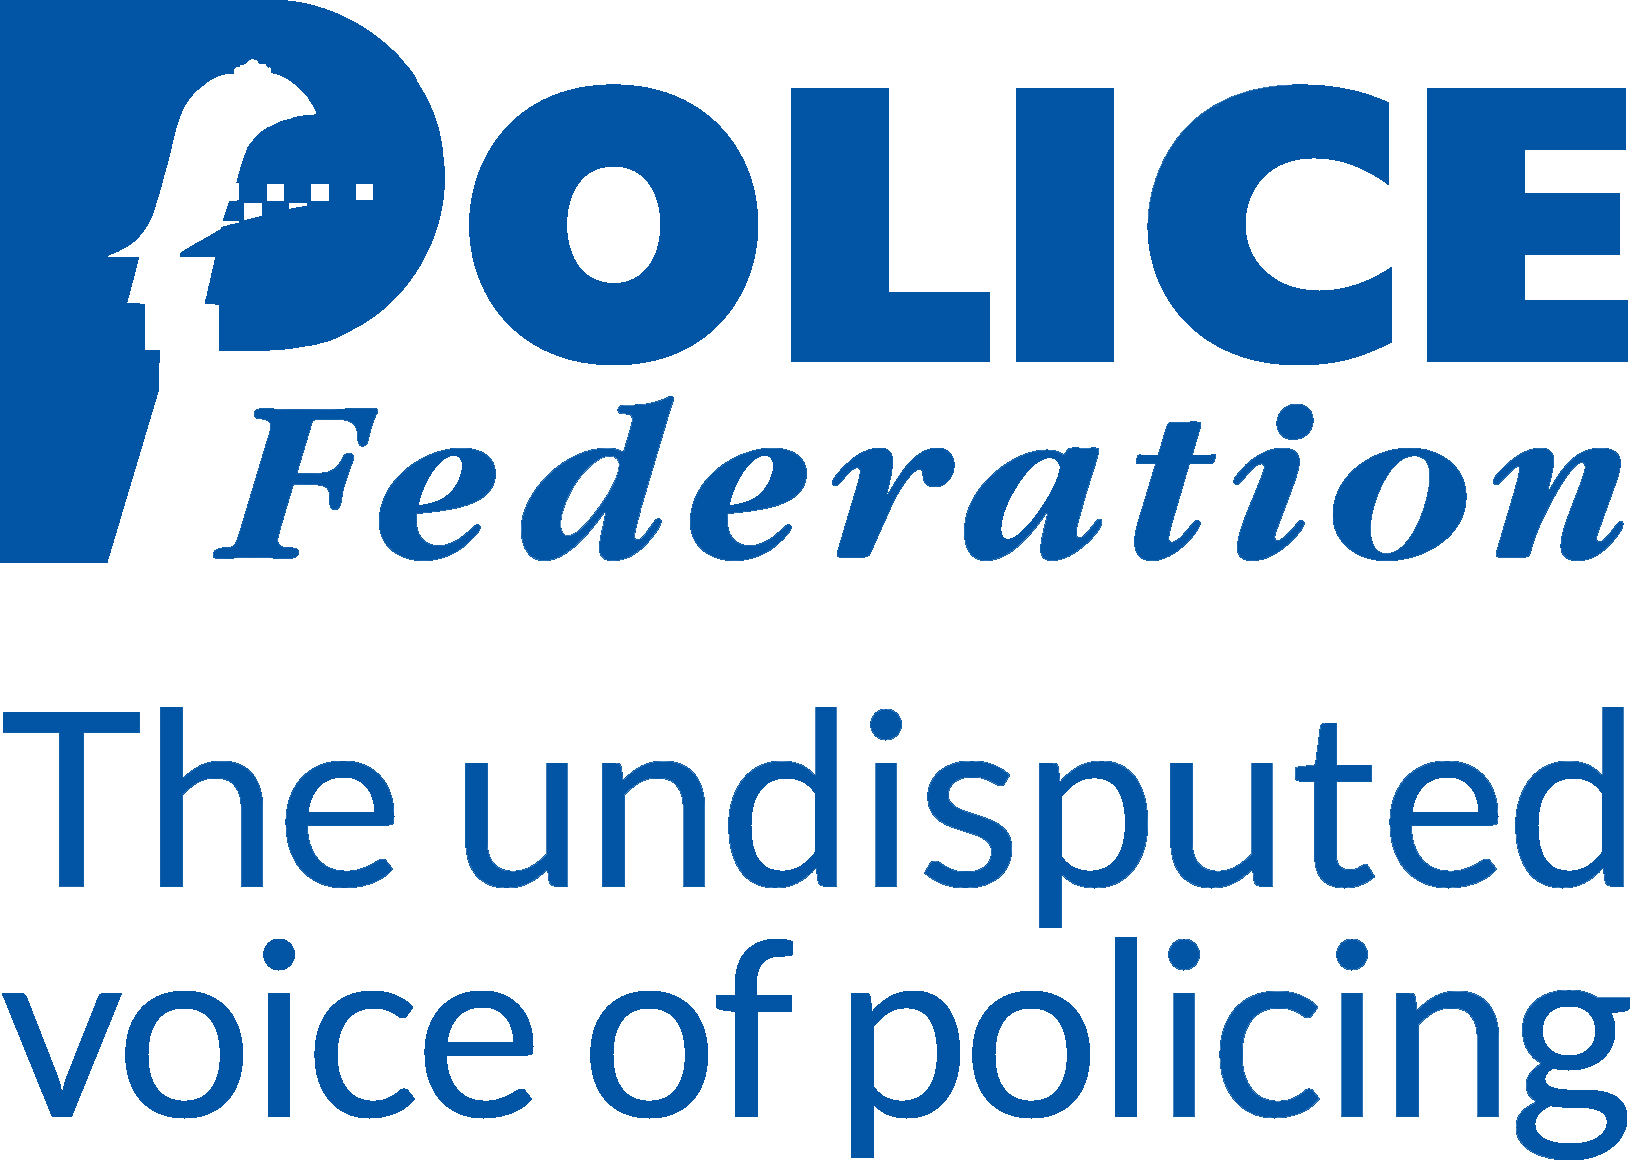 Police Federation England and Wales